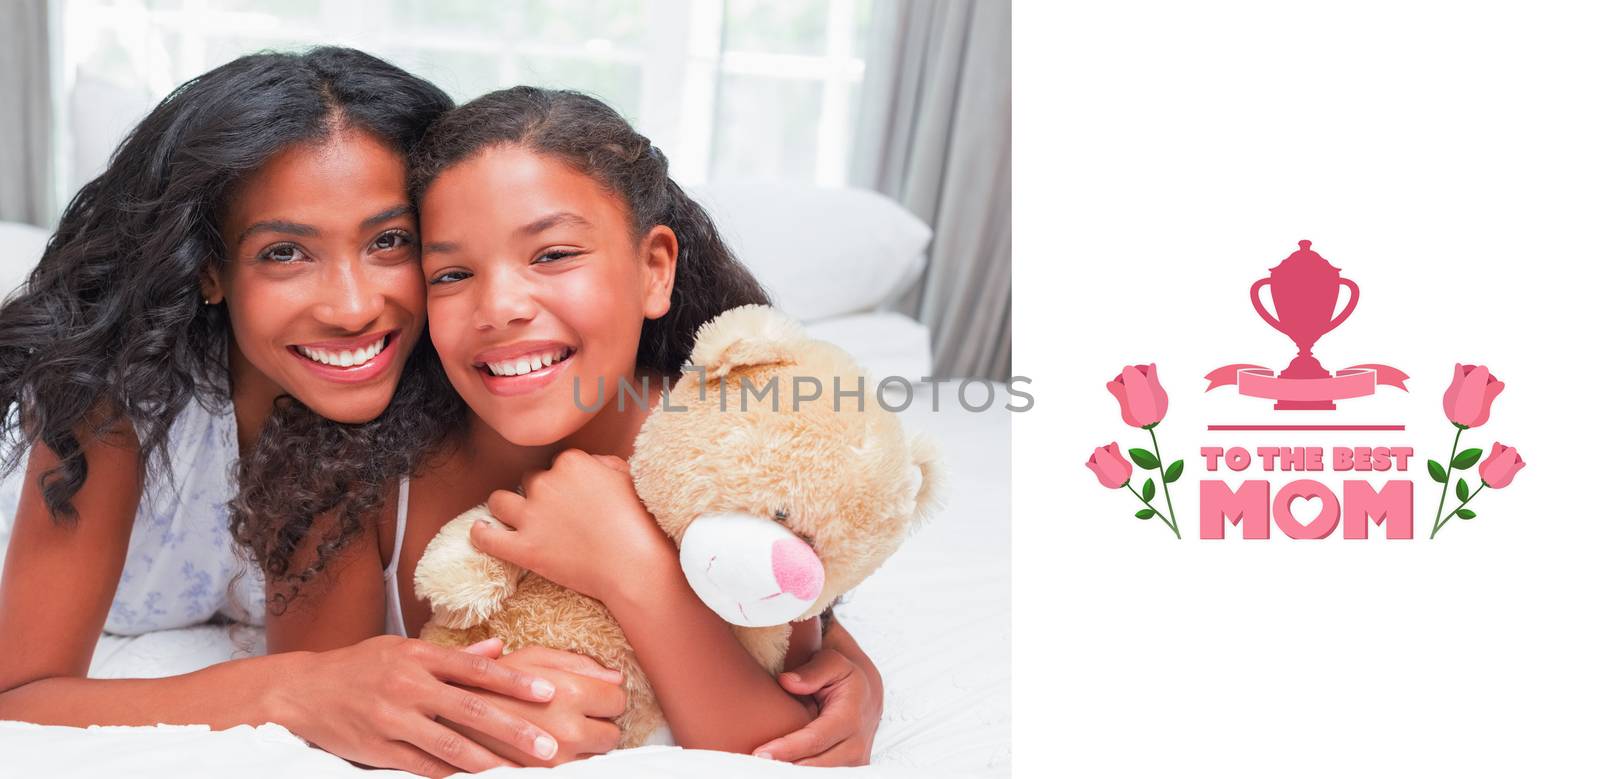 Pretty woman lying on bed with her daughter smiling at camera against mothers day greeting